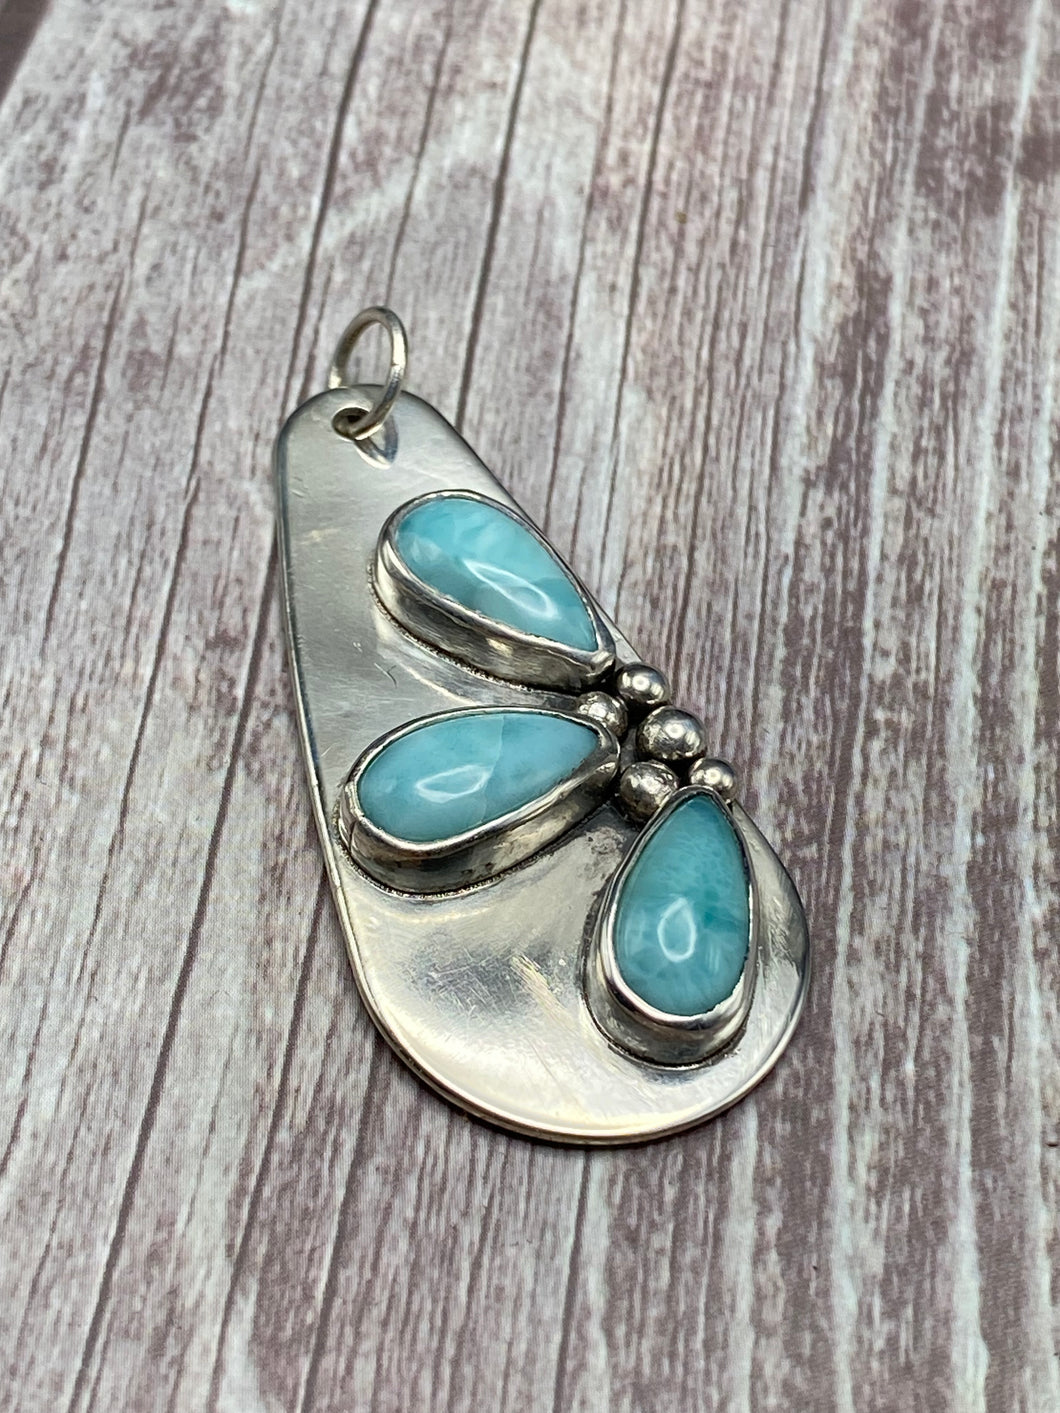 Lovely Larimar Sterling Silver Pendant on Leather Necklace